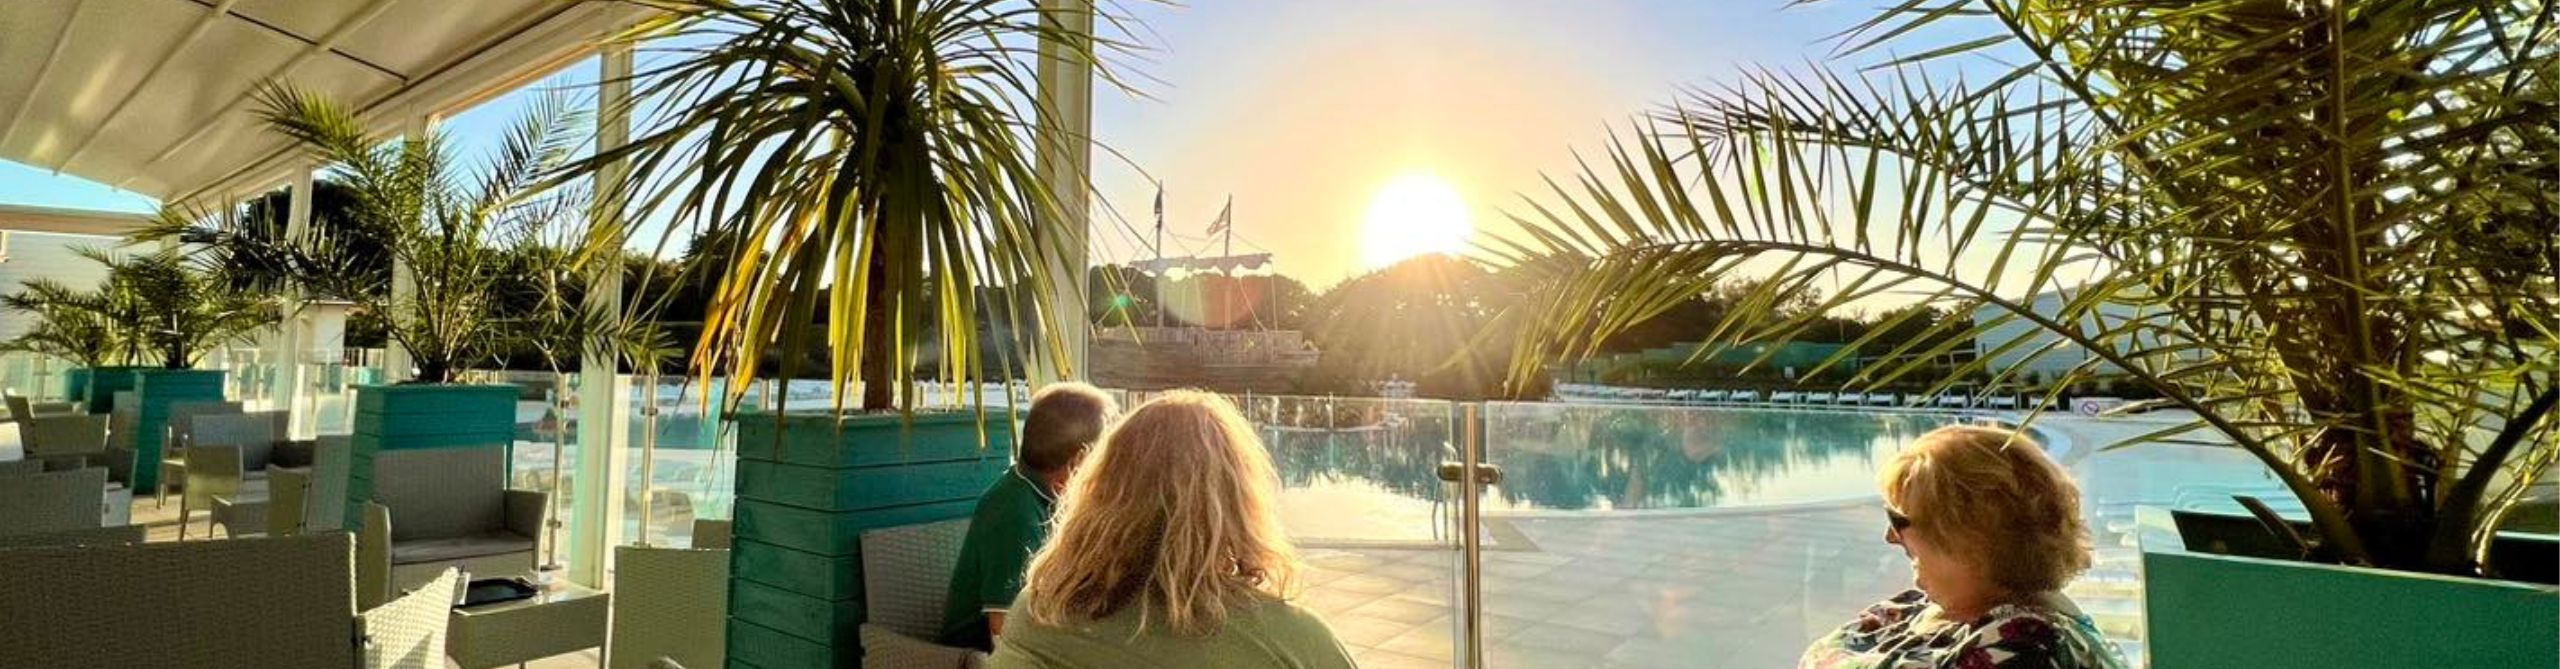 Two people sitting and enjoying a sunset view over a pool surrounded by palm trees, with a picturesque pirate ship in the background at Monkey Tree Holiday Park in Cornwall.